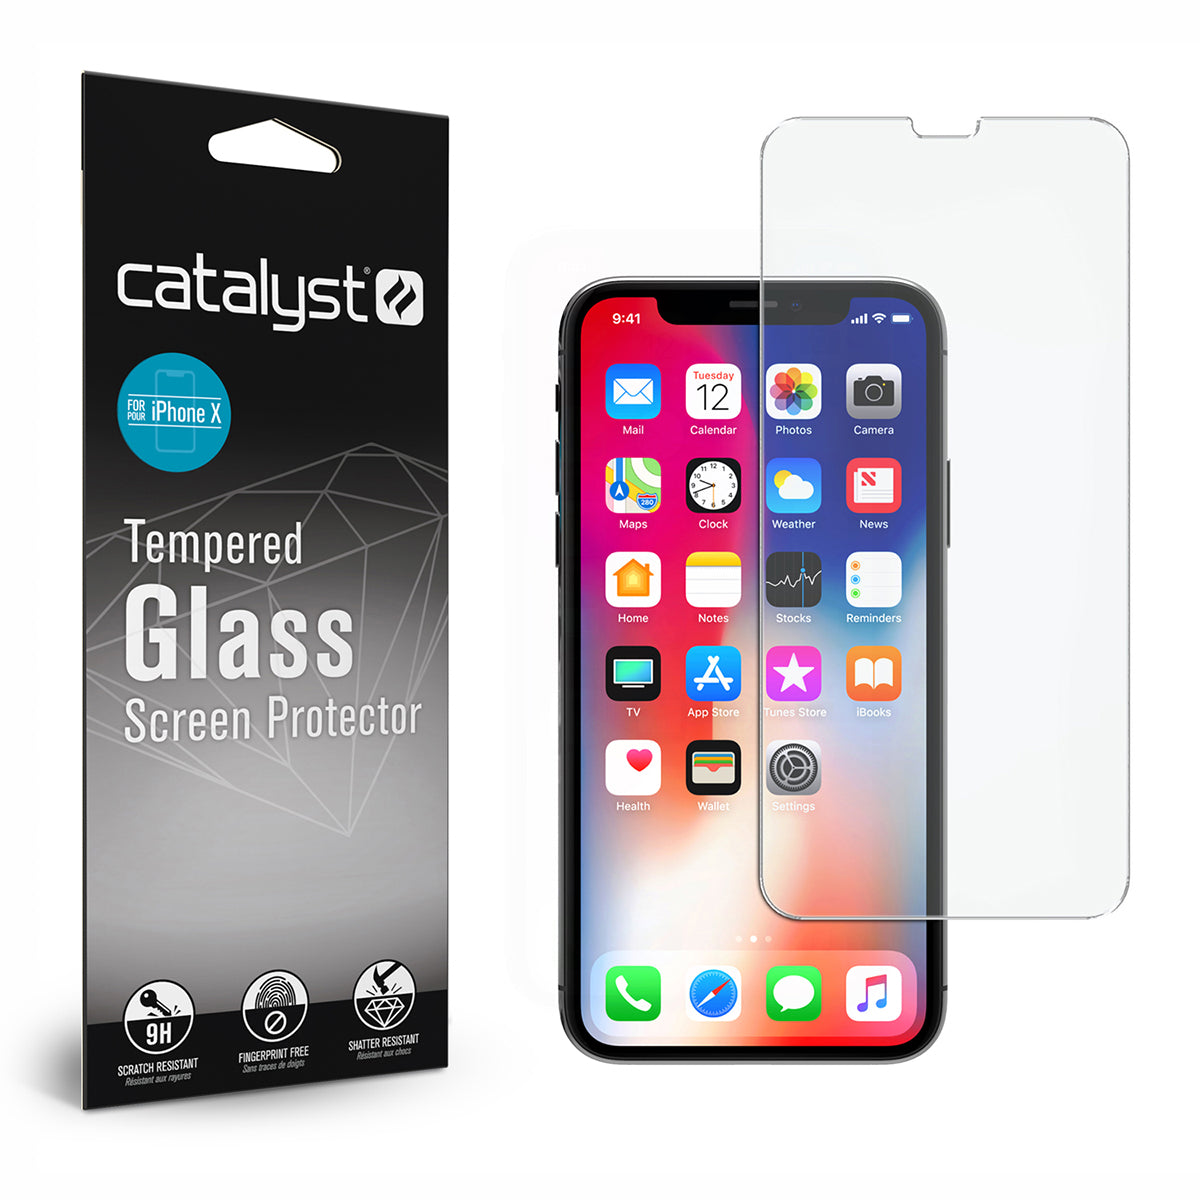 Catalyst Add a Tempered Glass Screen Protector with packaging and tempered glass screen protector and iPhone.